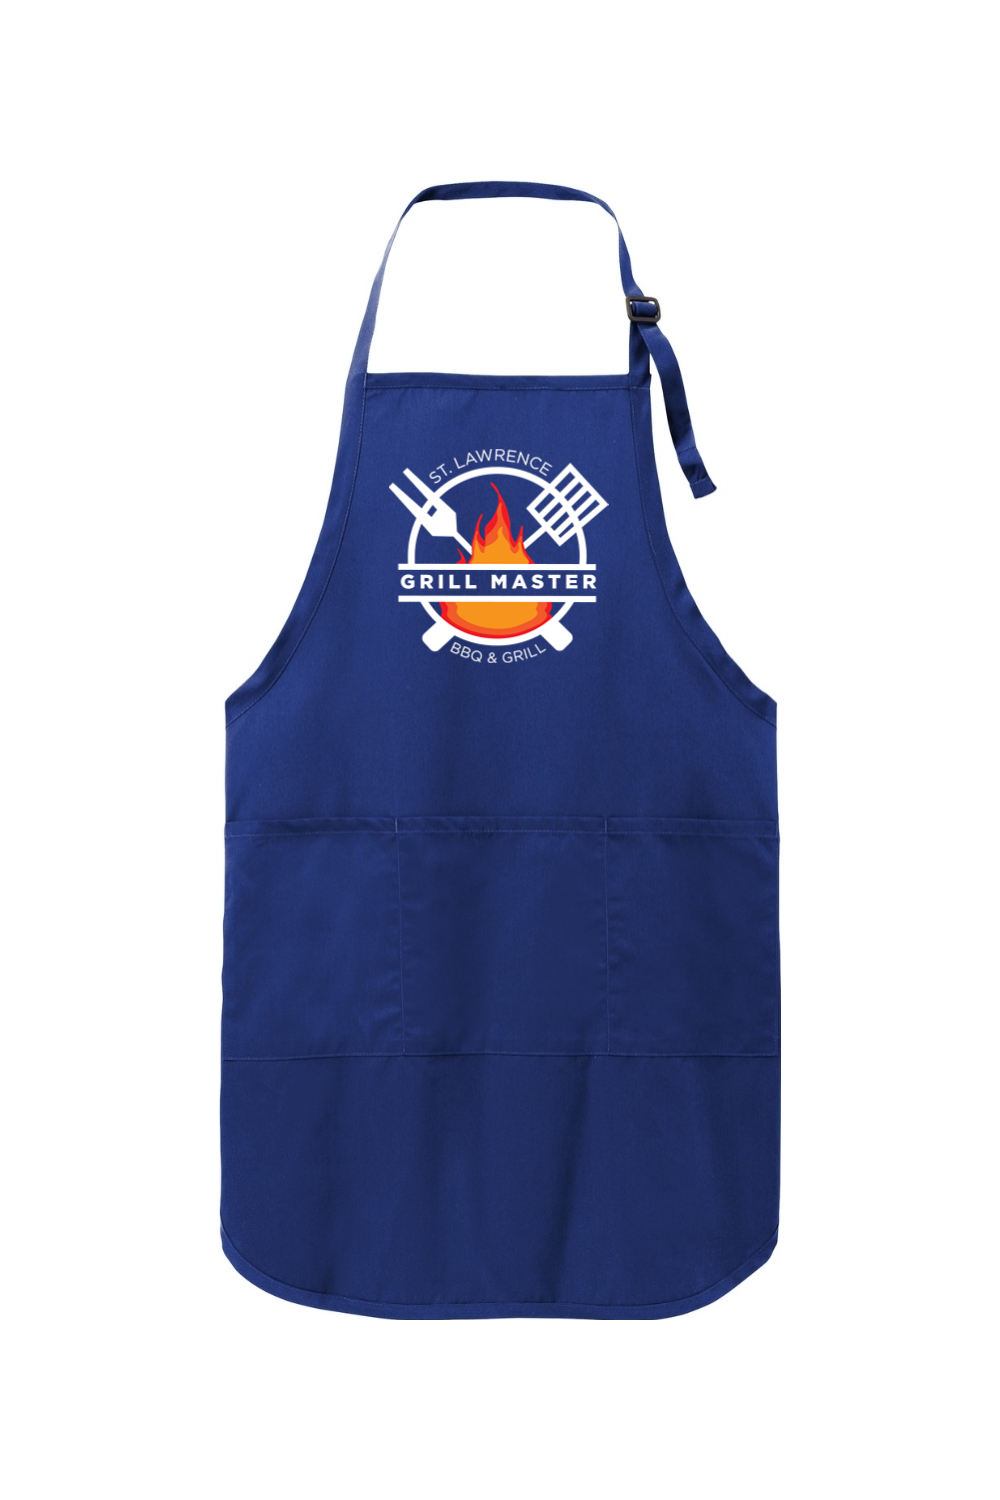 Grill Master - St. Lawrence Apron